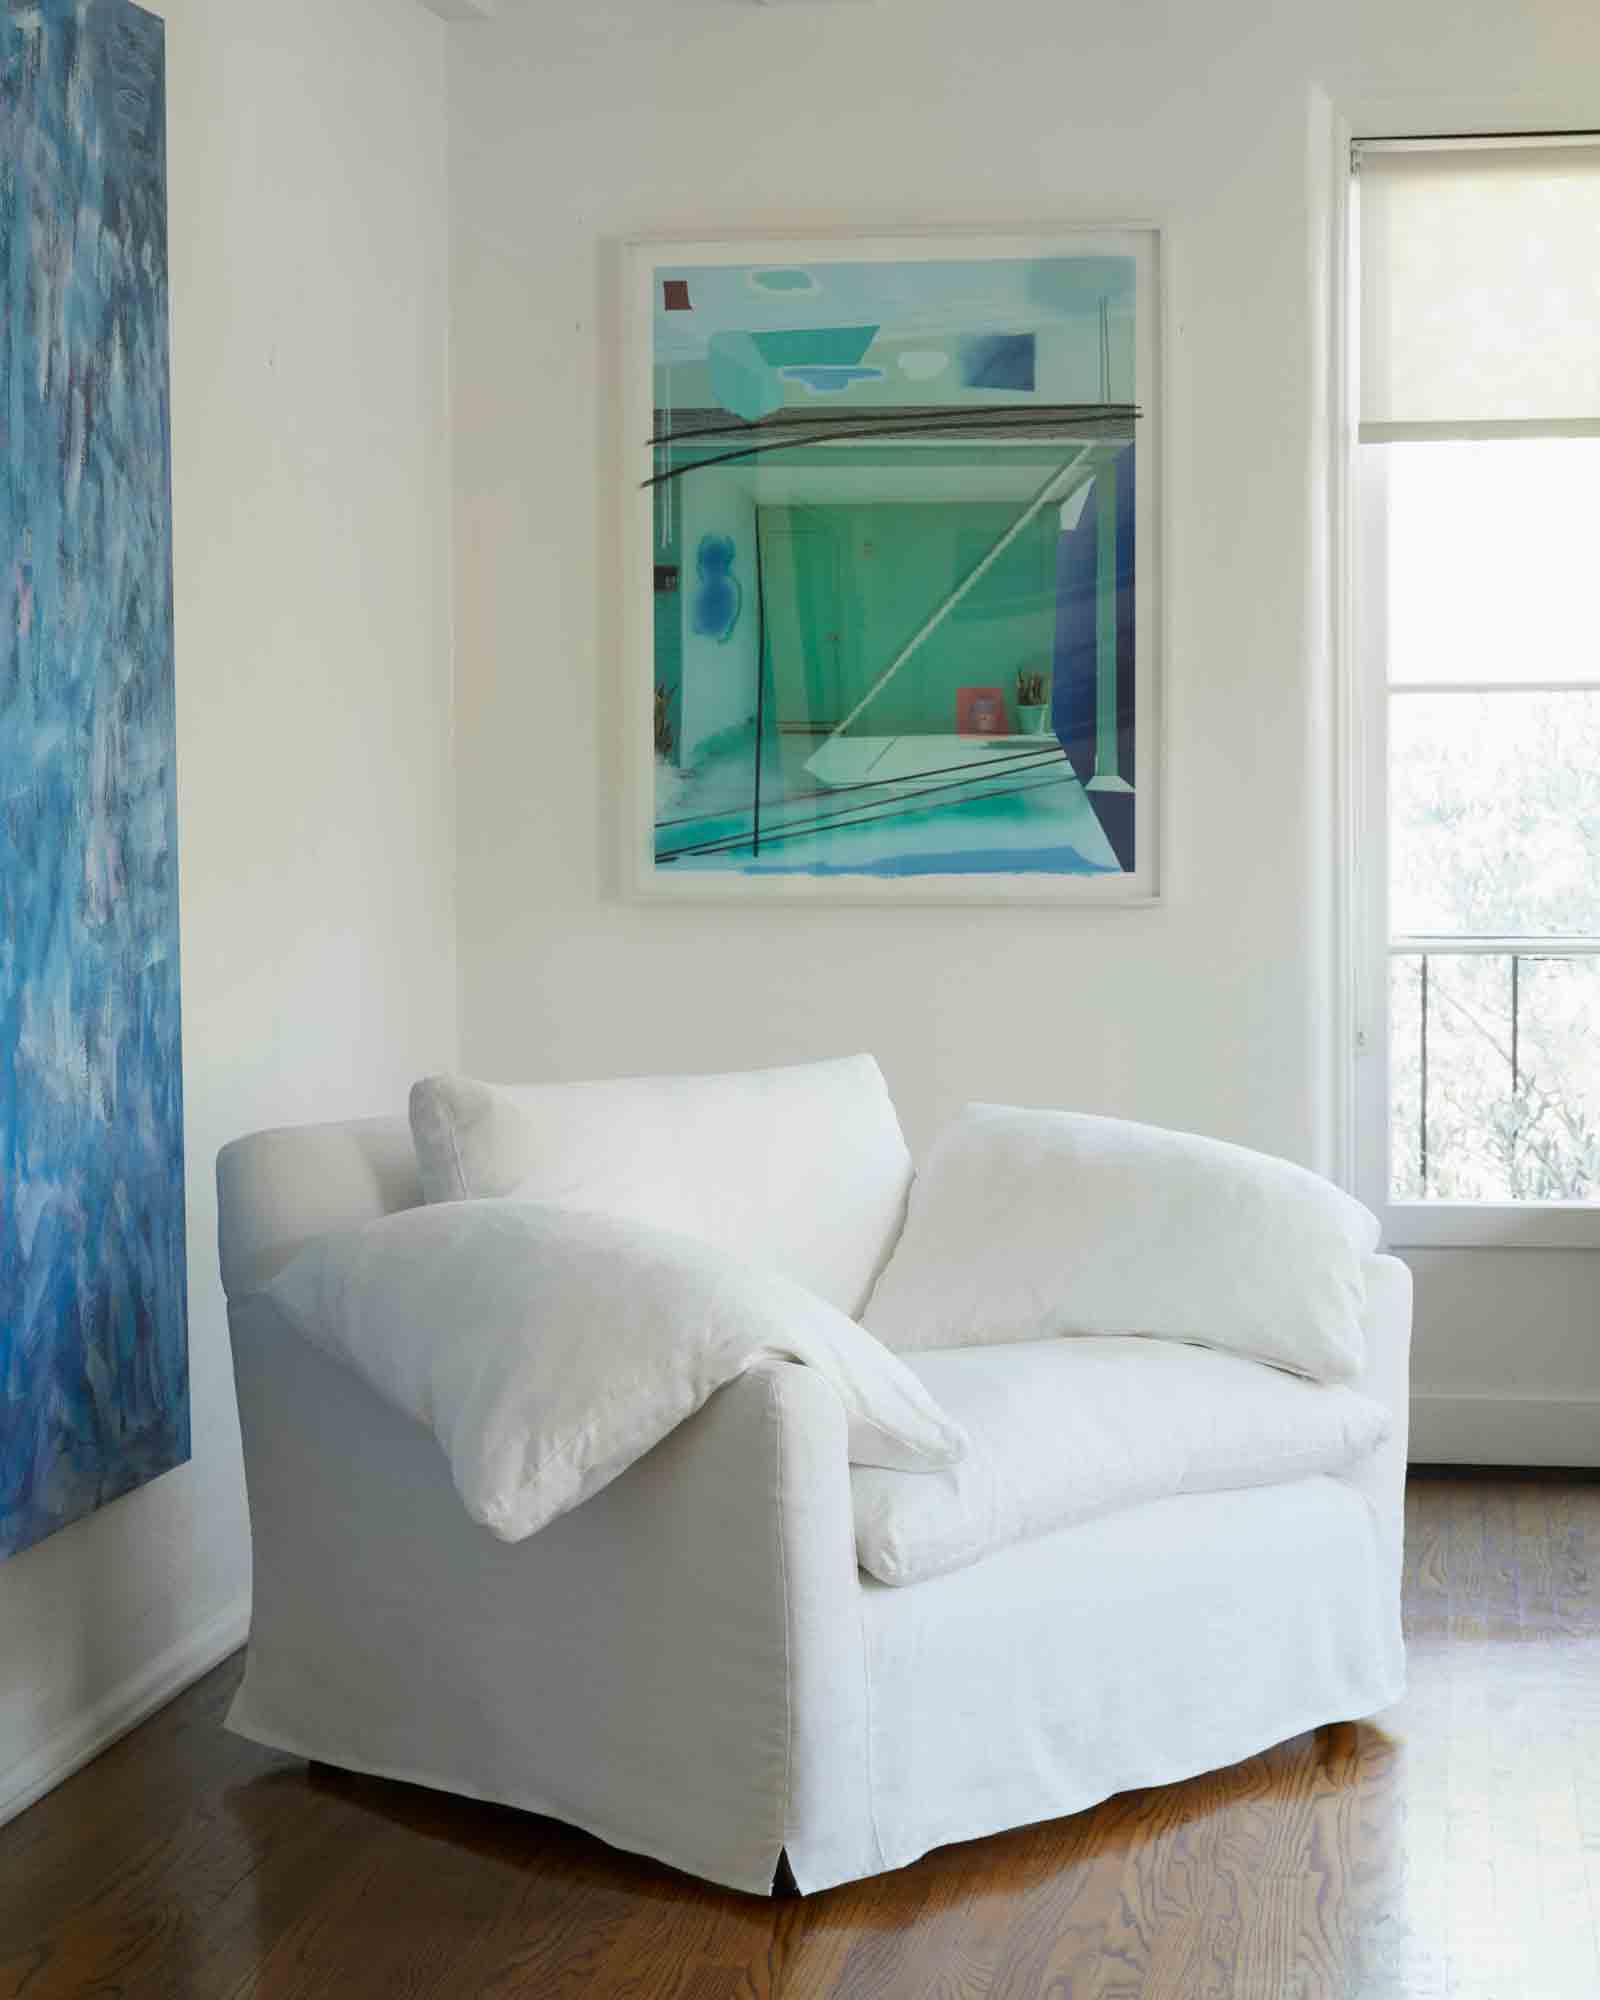  Chair in Otis White. In the background are white walls and colorful paintings. Photographed in Otis White. 